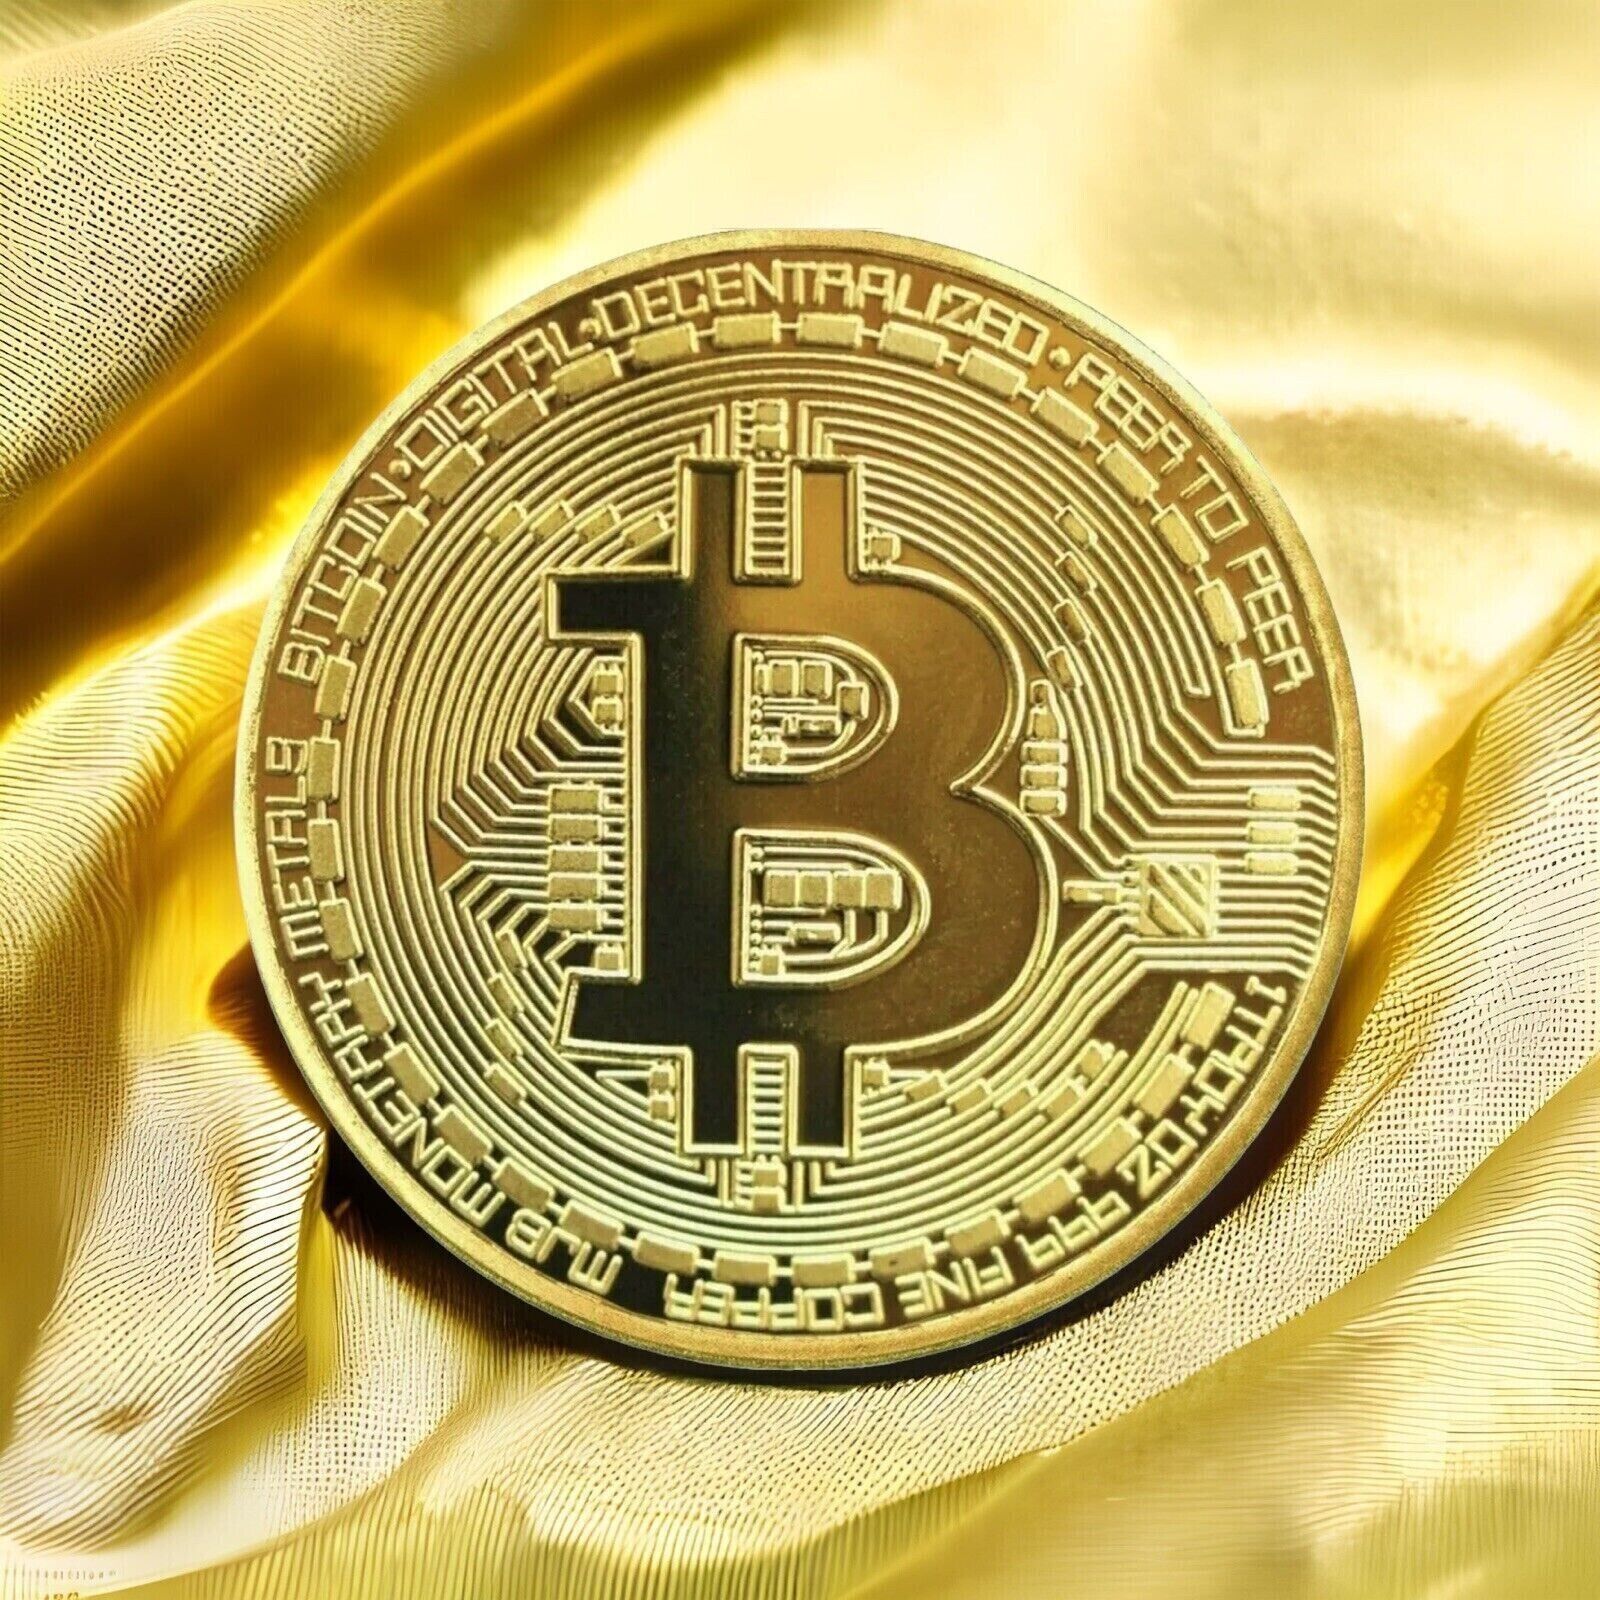 Gold Plated Bitcoin - Physical Metal Coin - BTC Cryptocurrency Collector Item